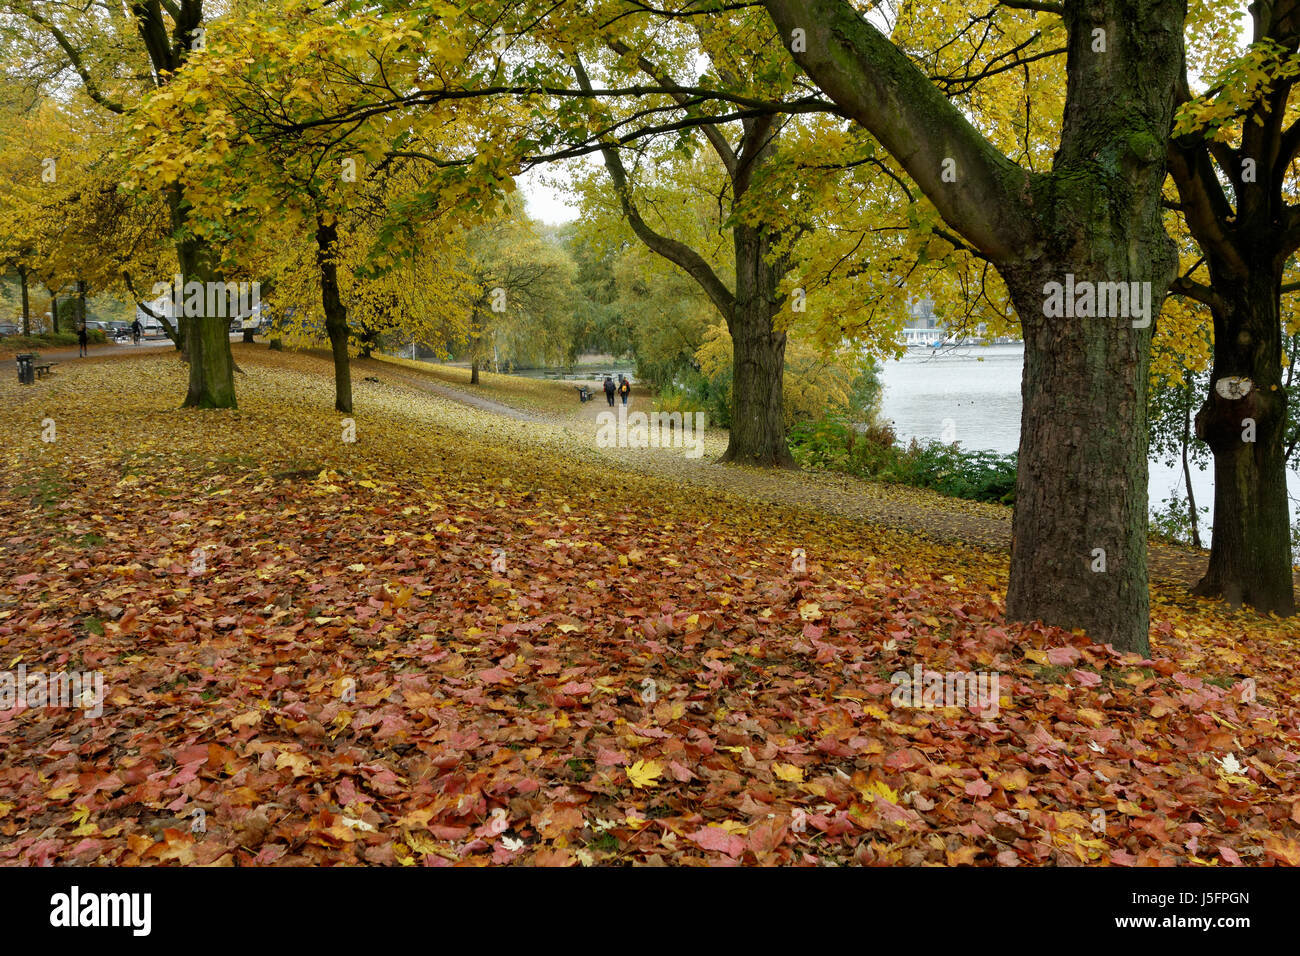 Autumn colours on the banks of An der Alster, Hamburg, Germany. Stock Photo